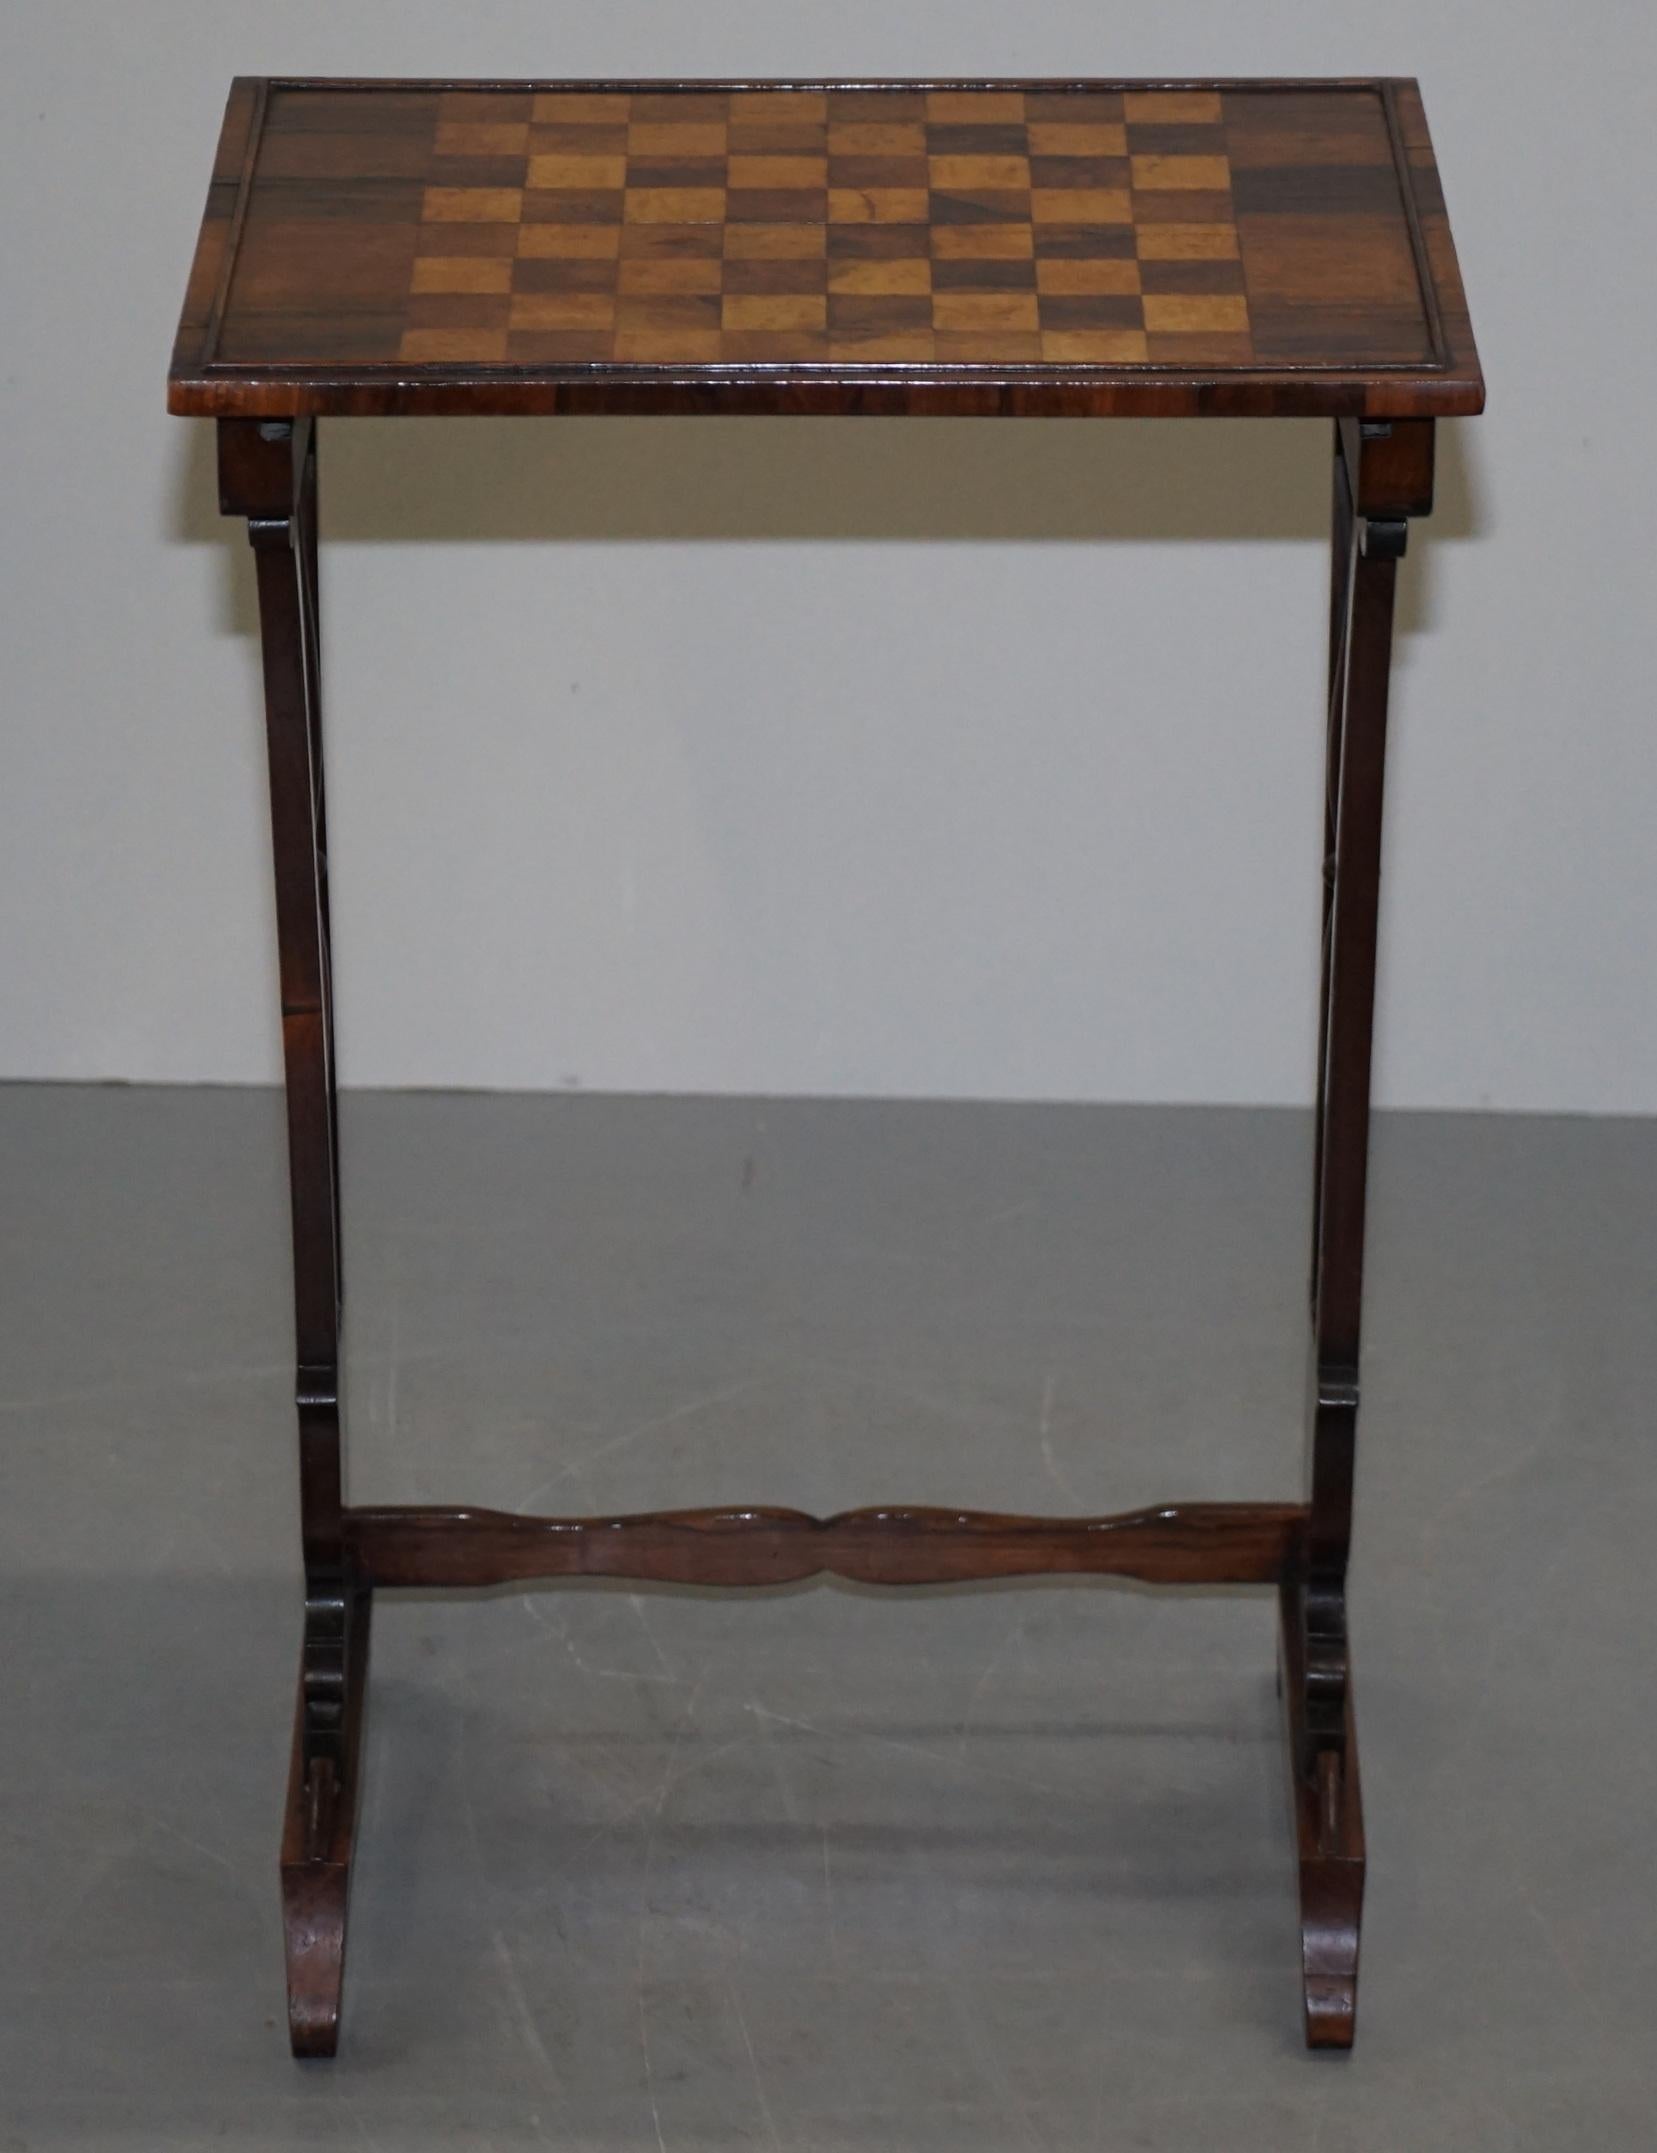 Fine Regency Nest of Hardwood Tables with Chessboard Top Attributed to Gillows For Sale 1